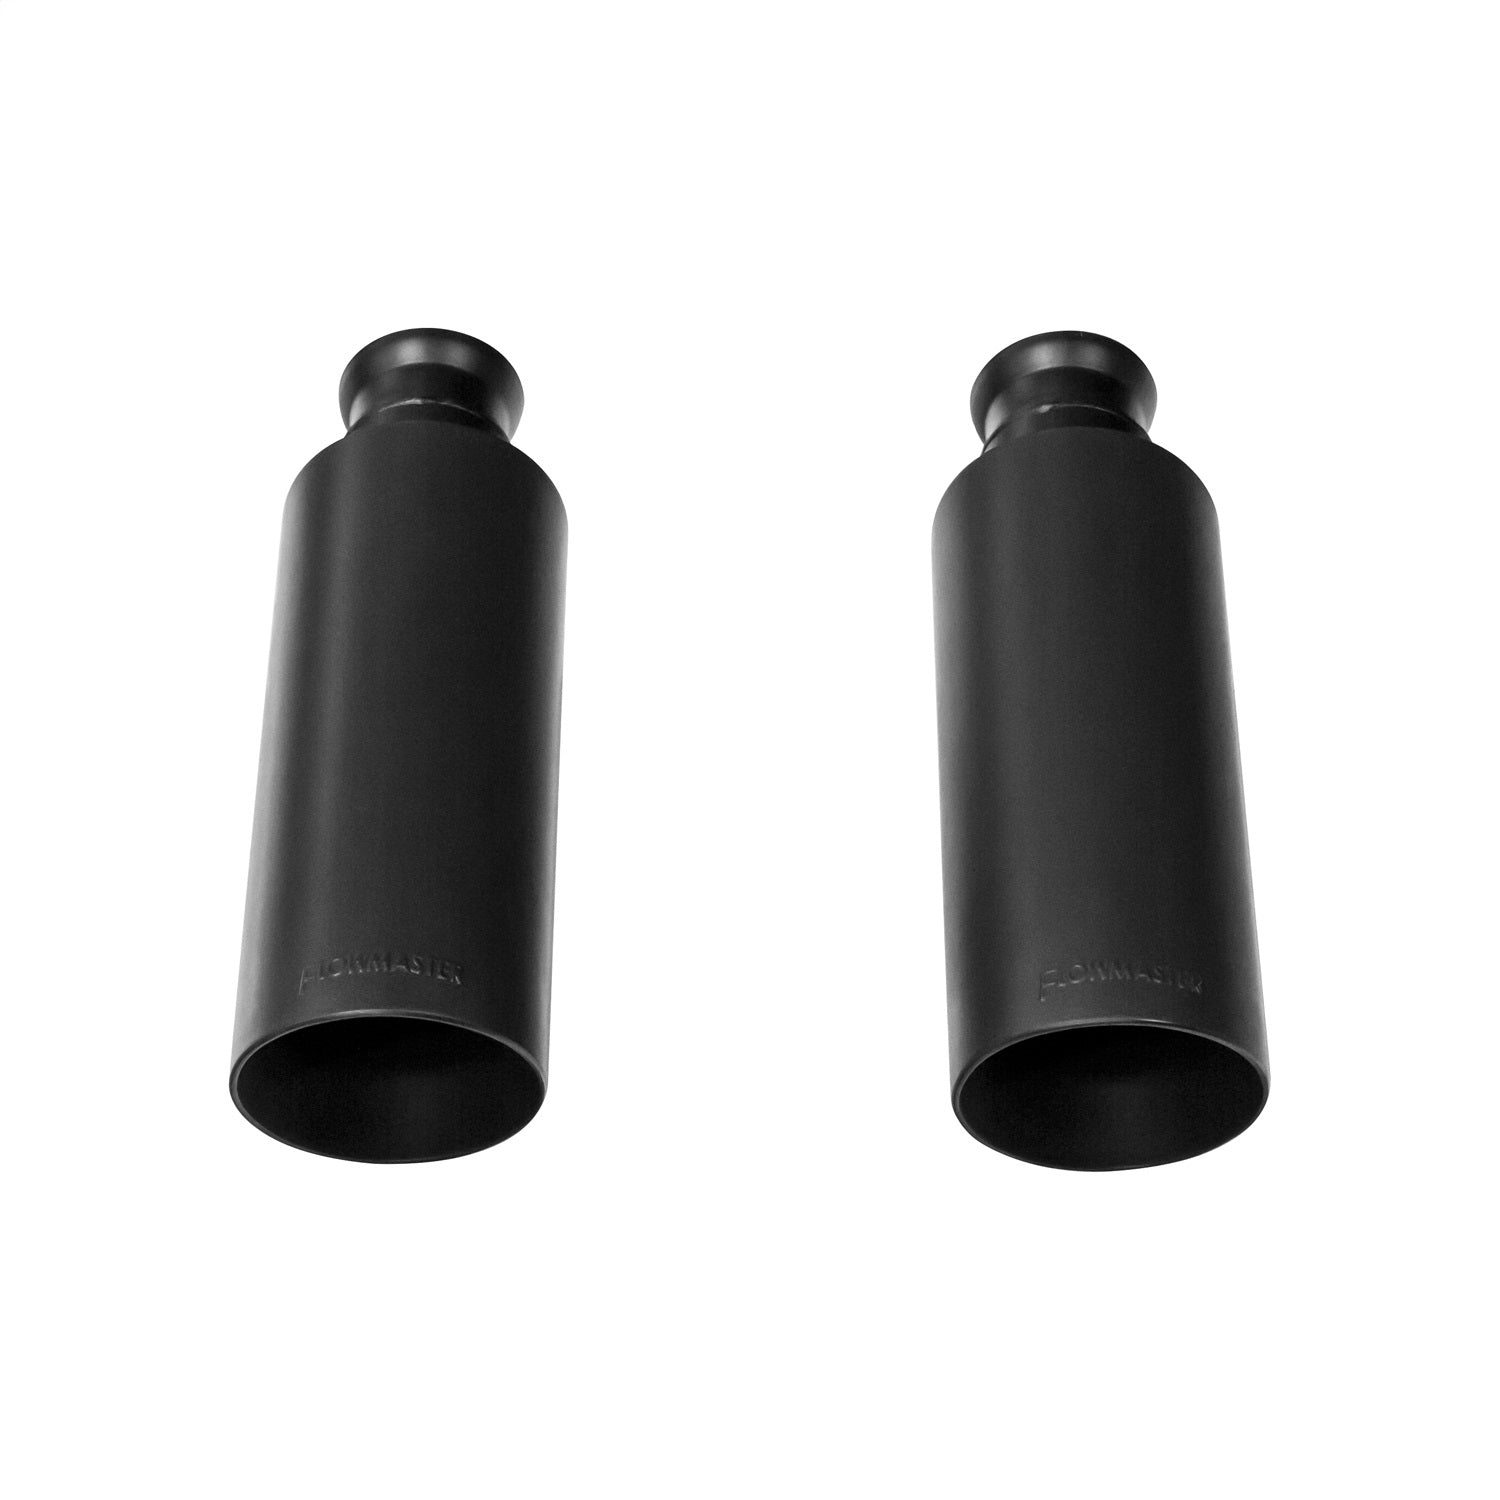 Flowmaster 15356B Stainless Steel Exhaust Tip Fits 1500 1500 Classic Ram 1500